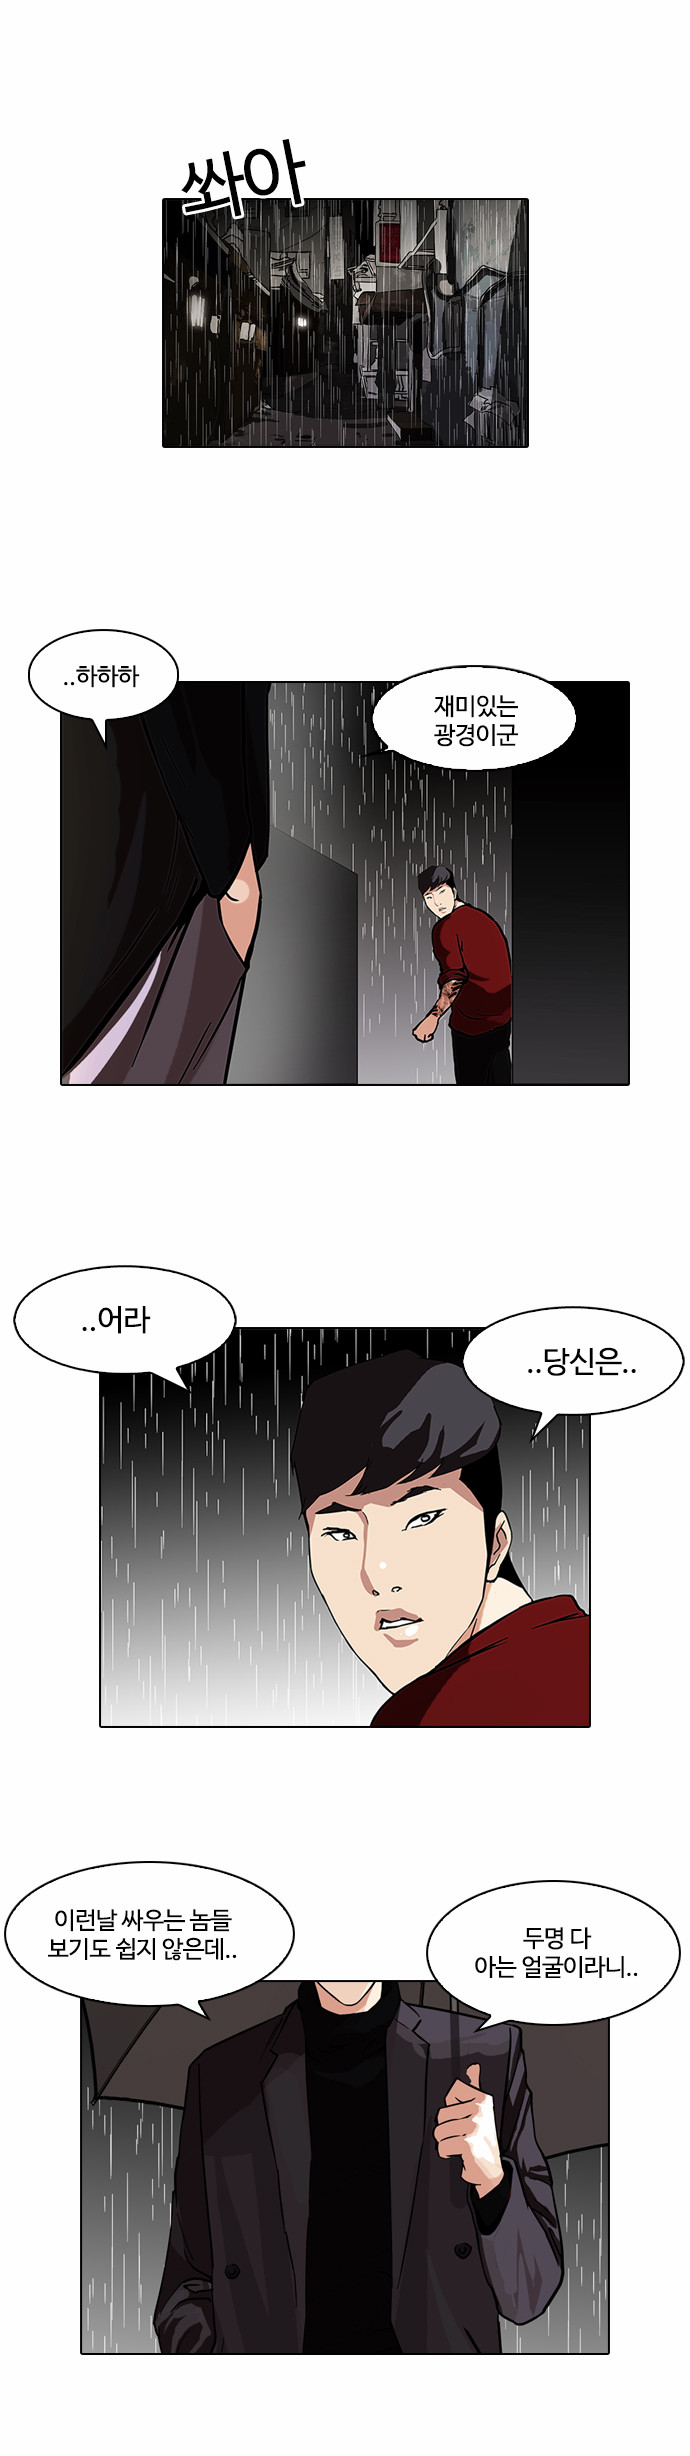 Lookism - Chapter 89 - Page 1